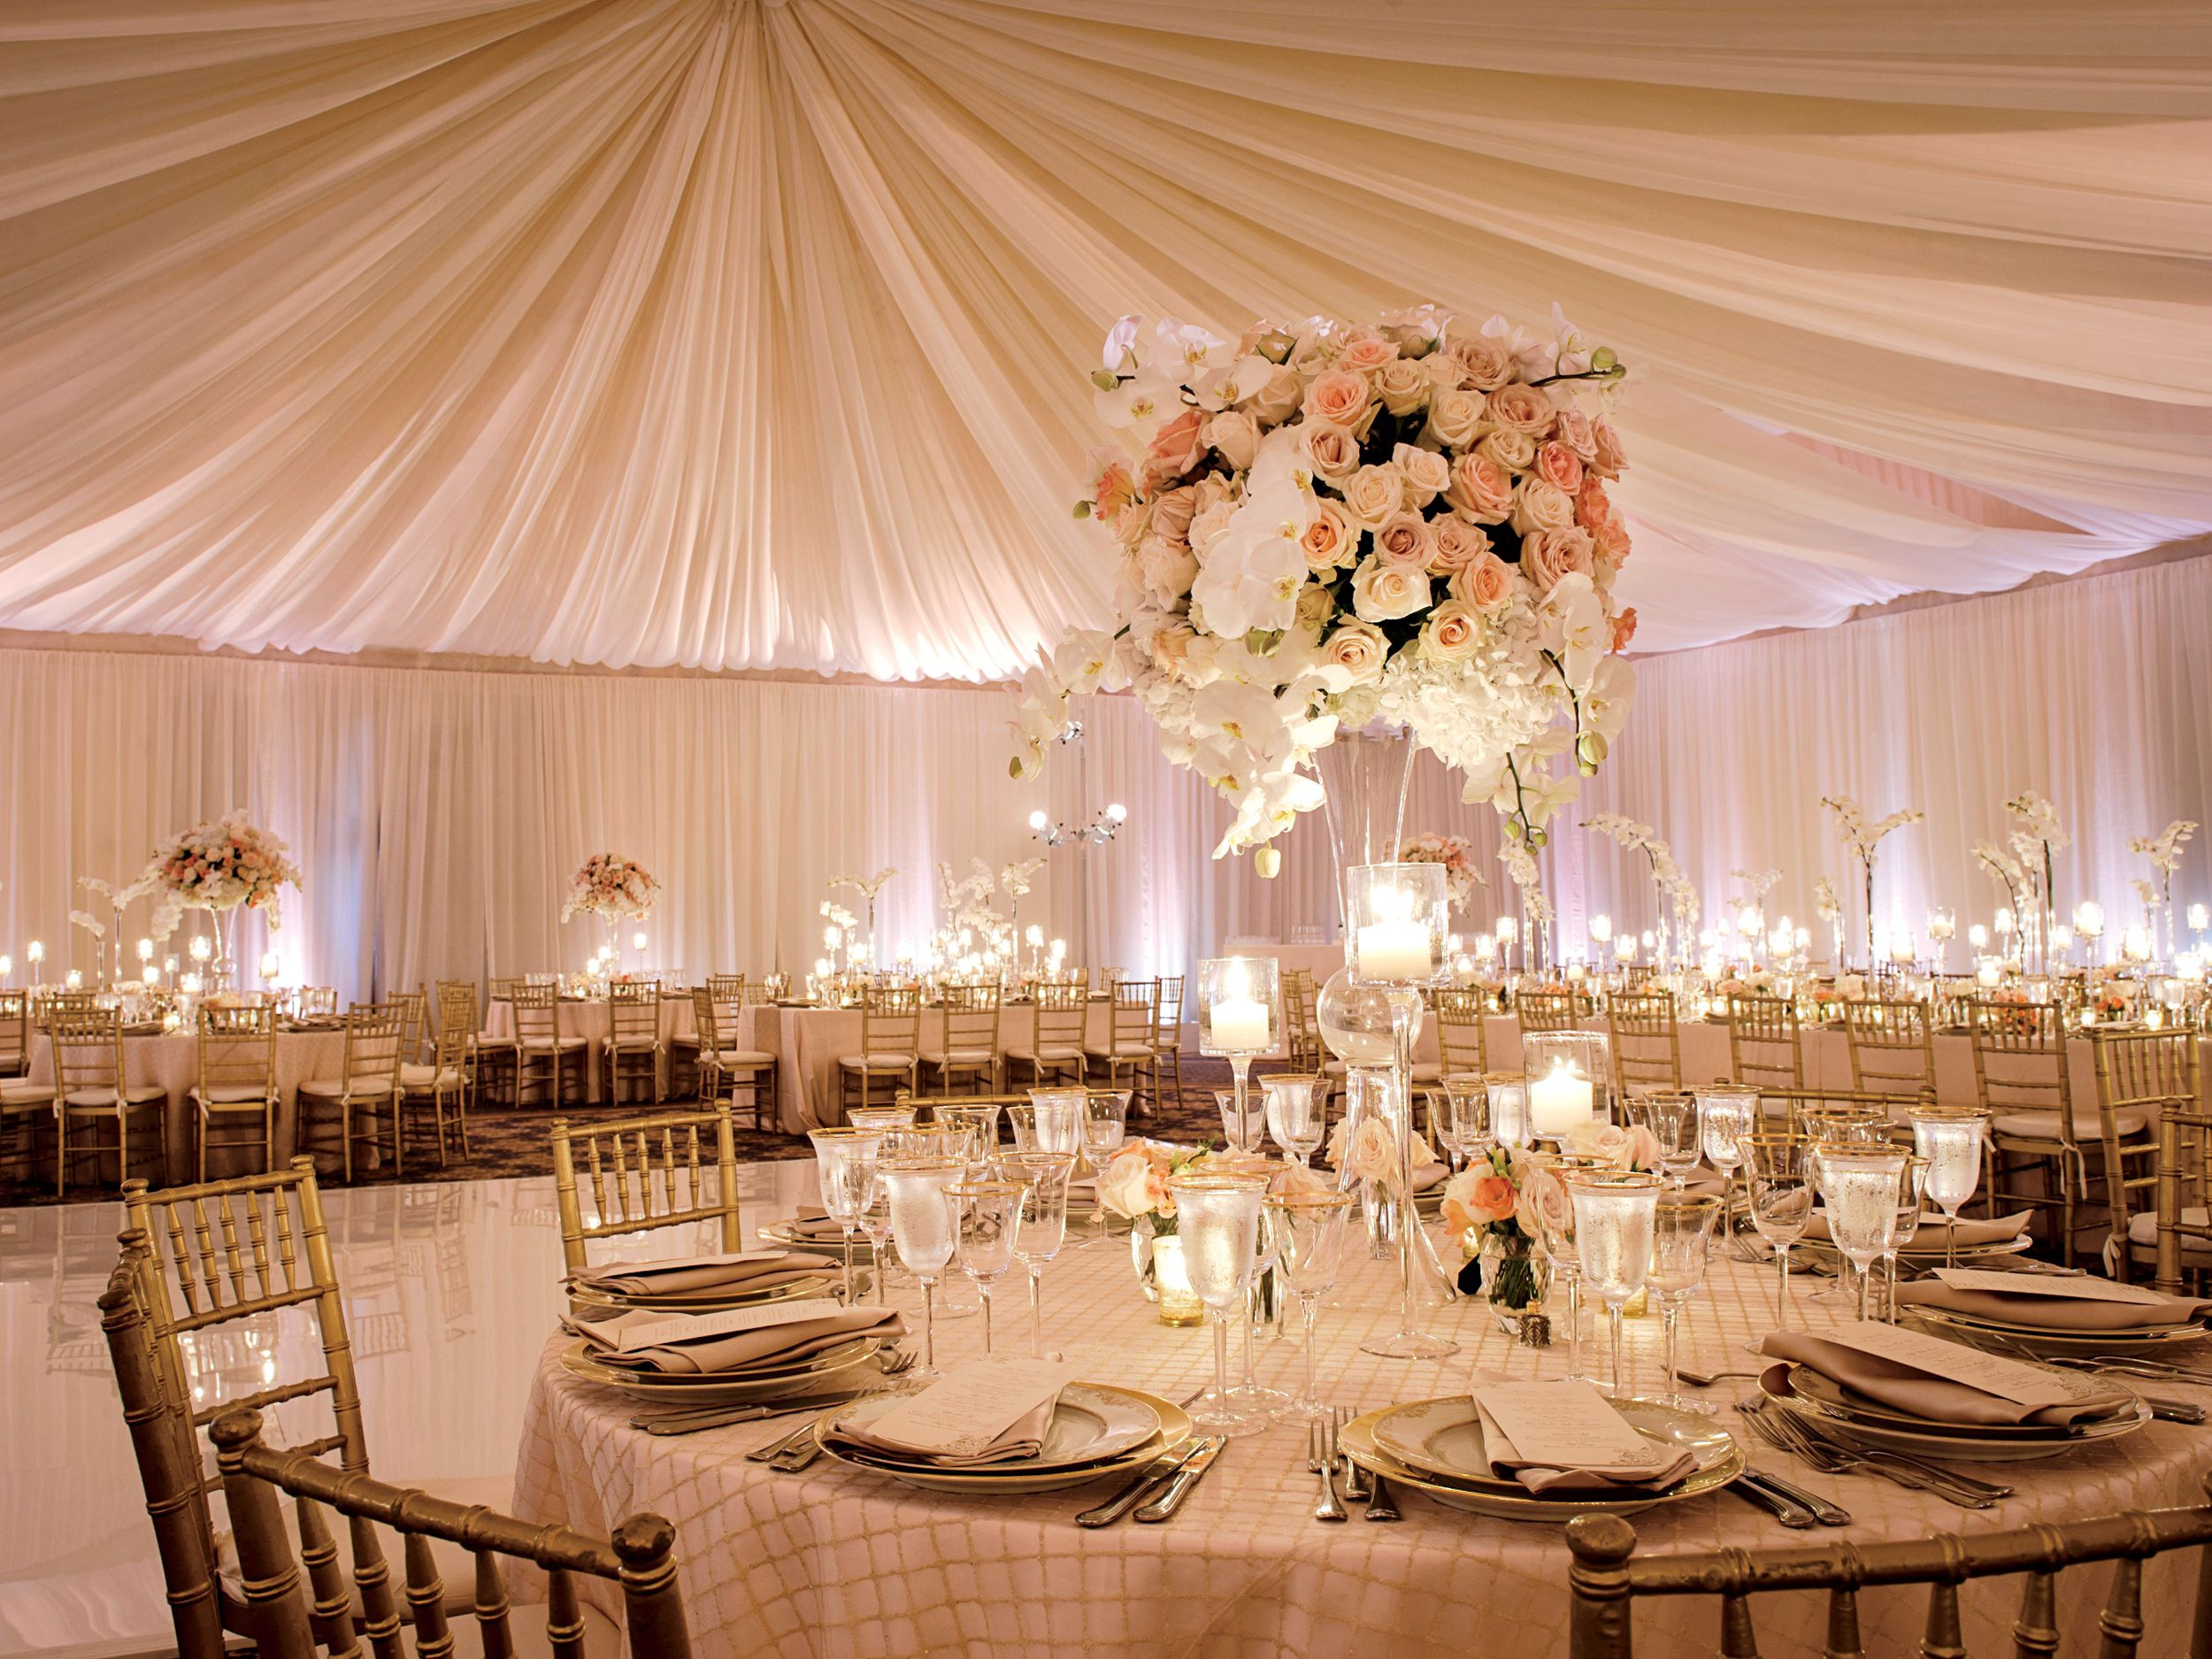 DIY Ceiling Draping For Weddings
 7 Wedding Reception Hacks You Need to Know About